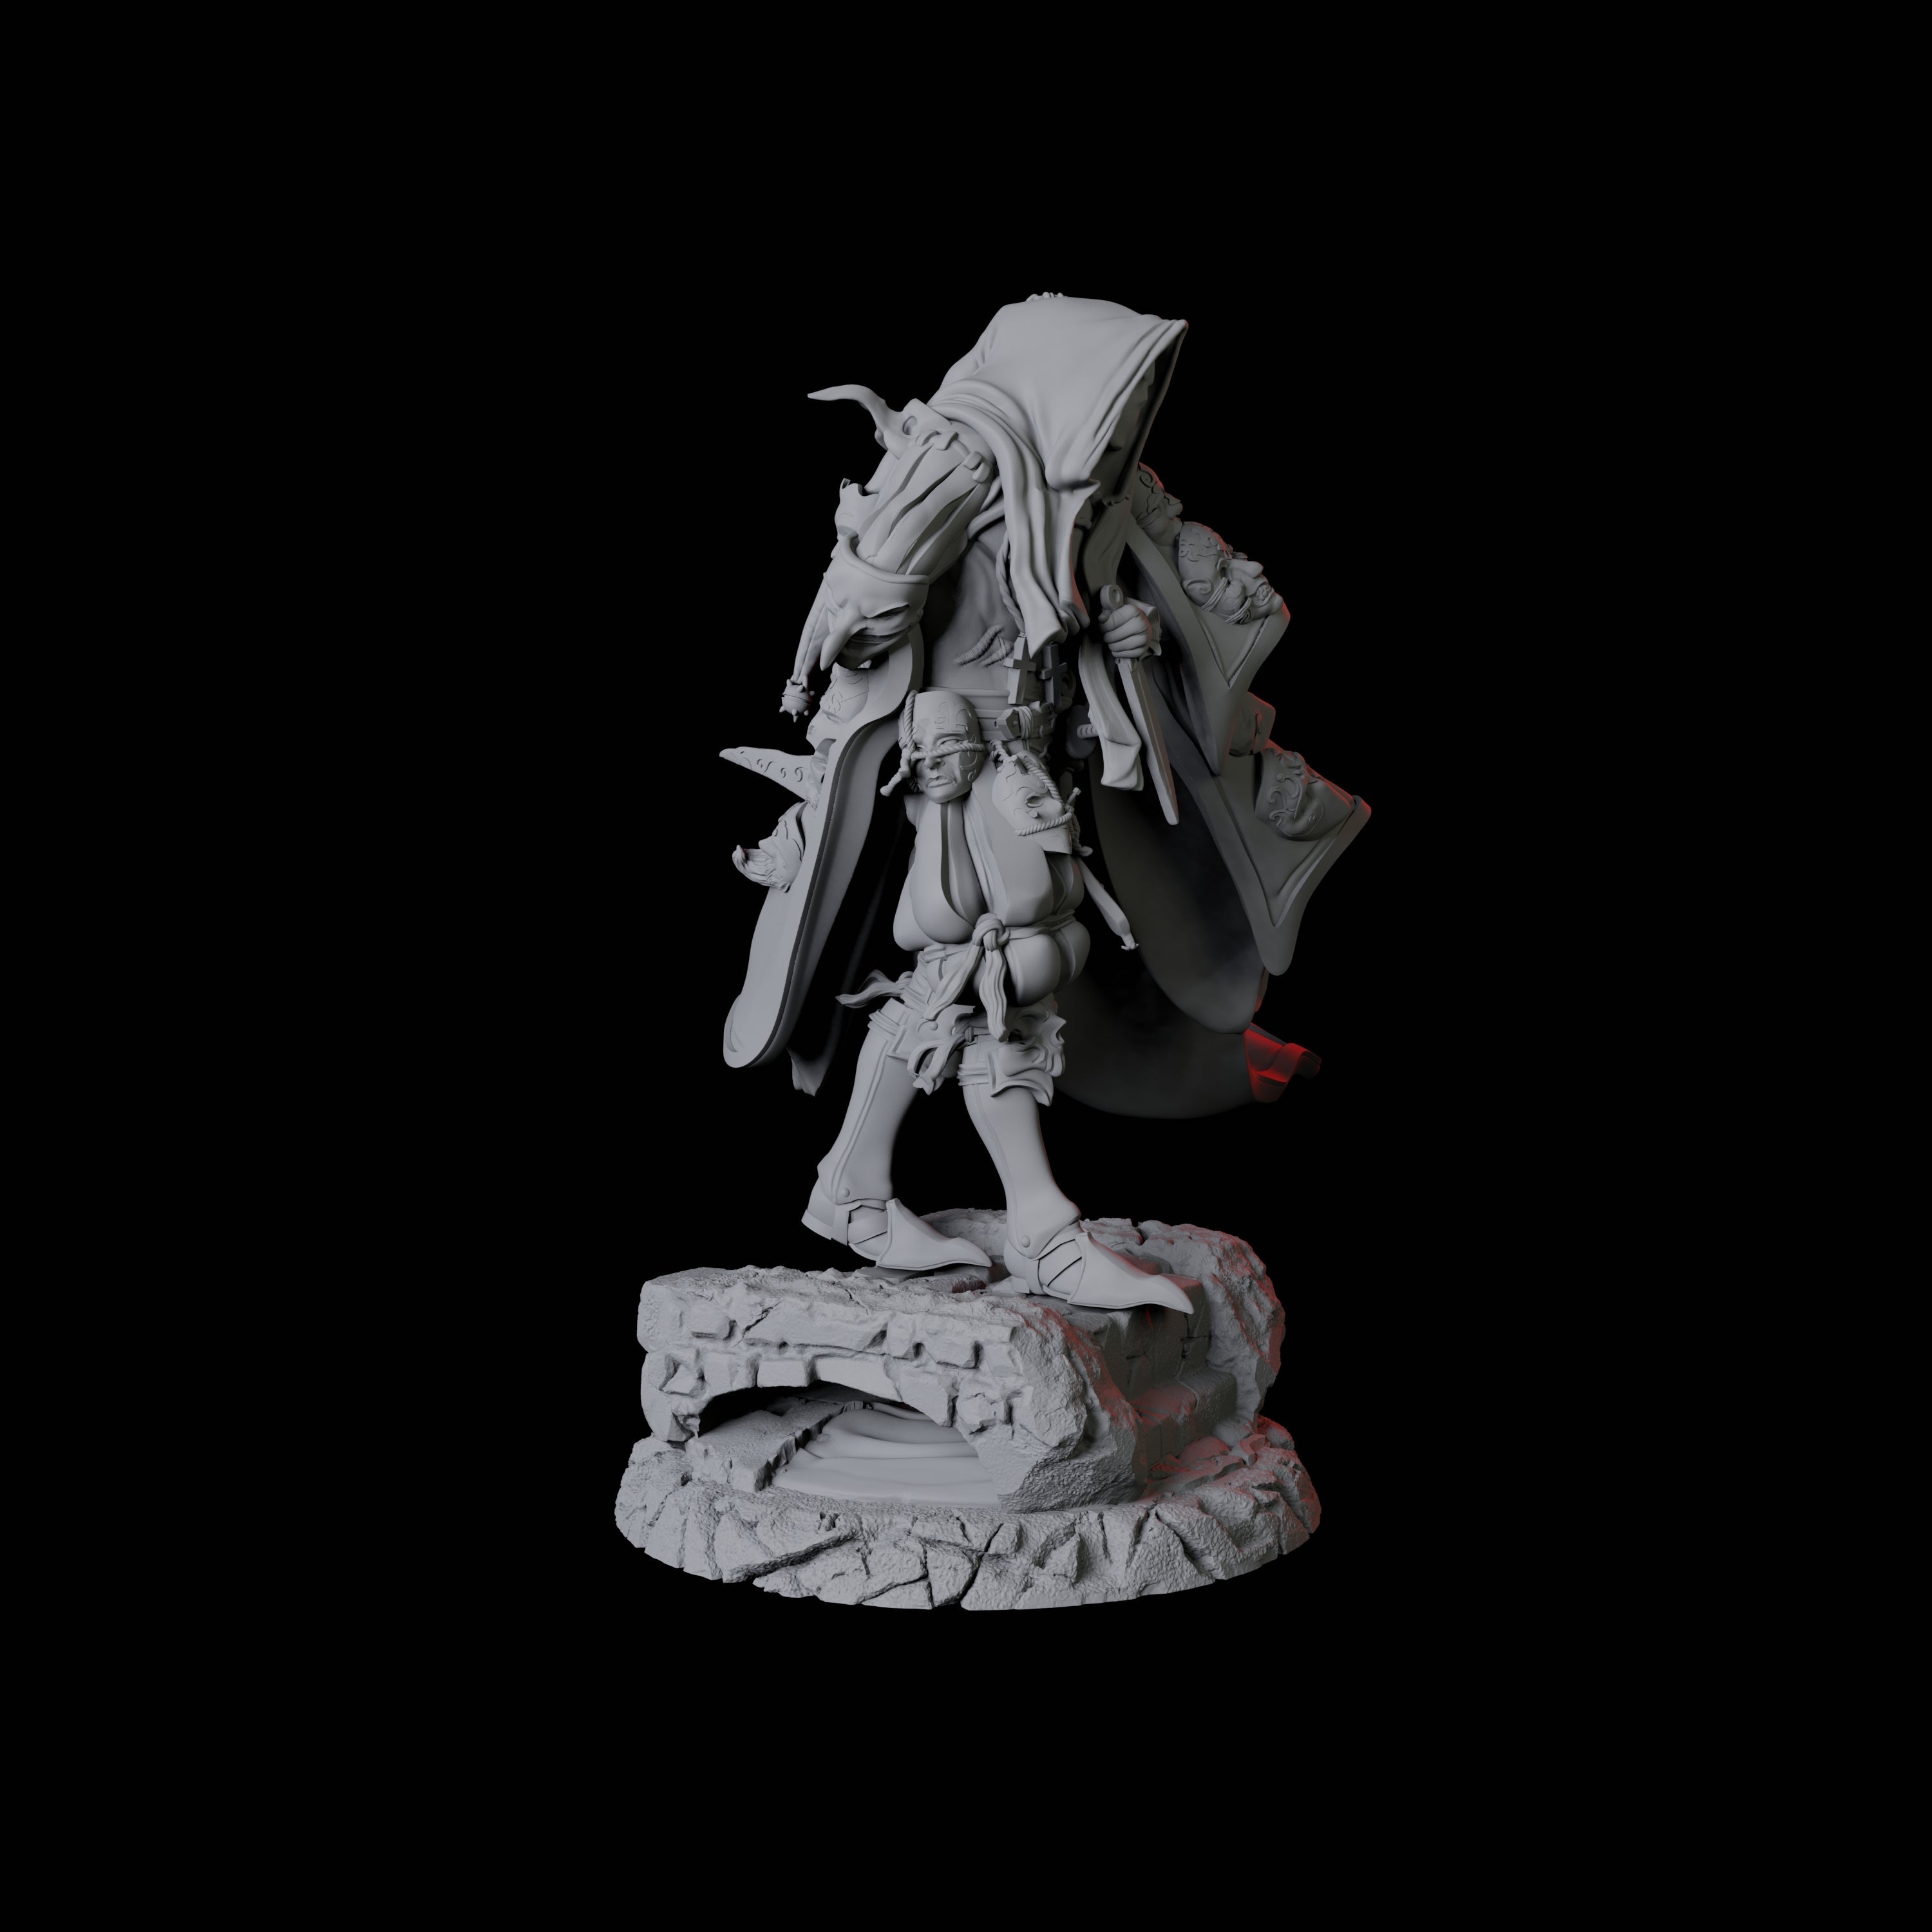 Masked Swordsman B Miniature for Dungeons and Dragons, Pathfinder or other TTRPGs